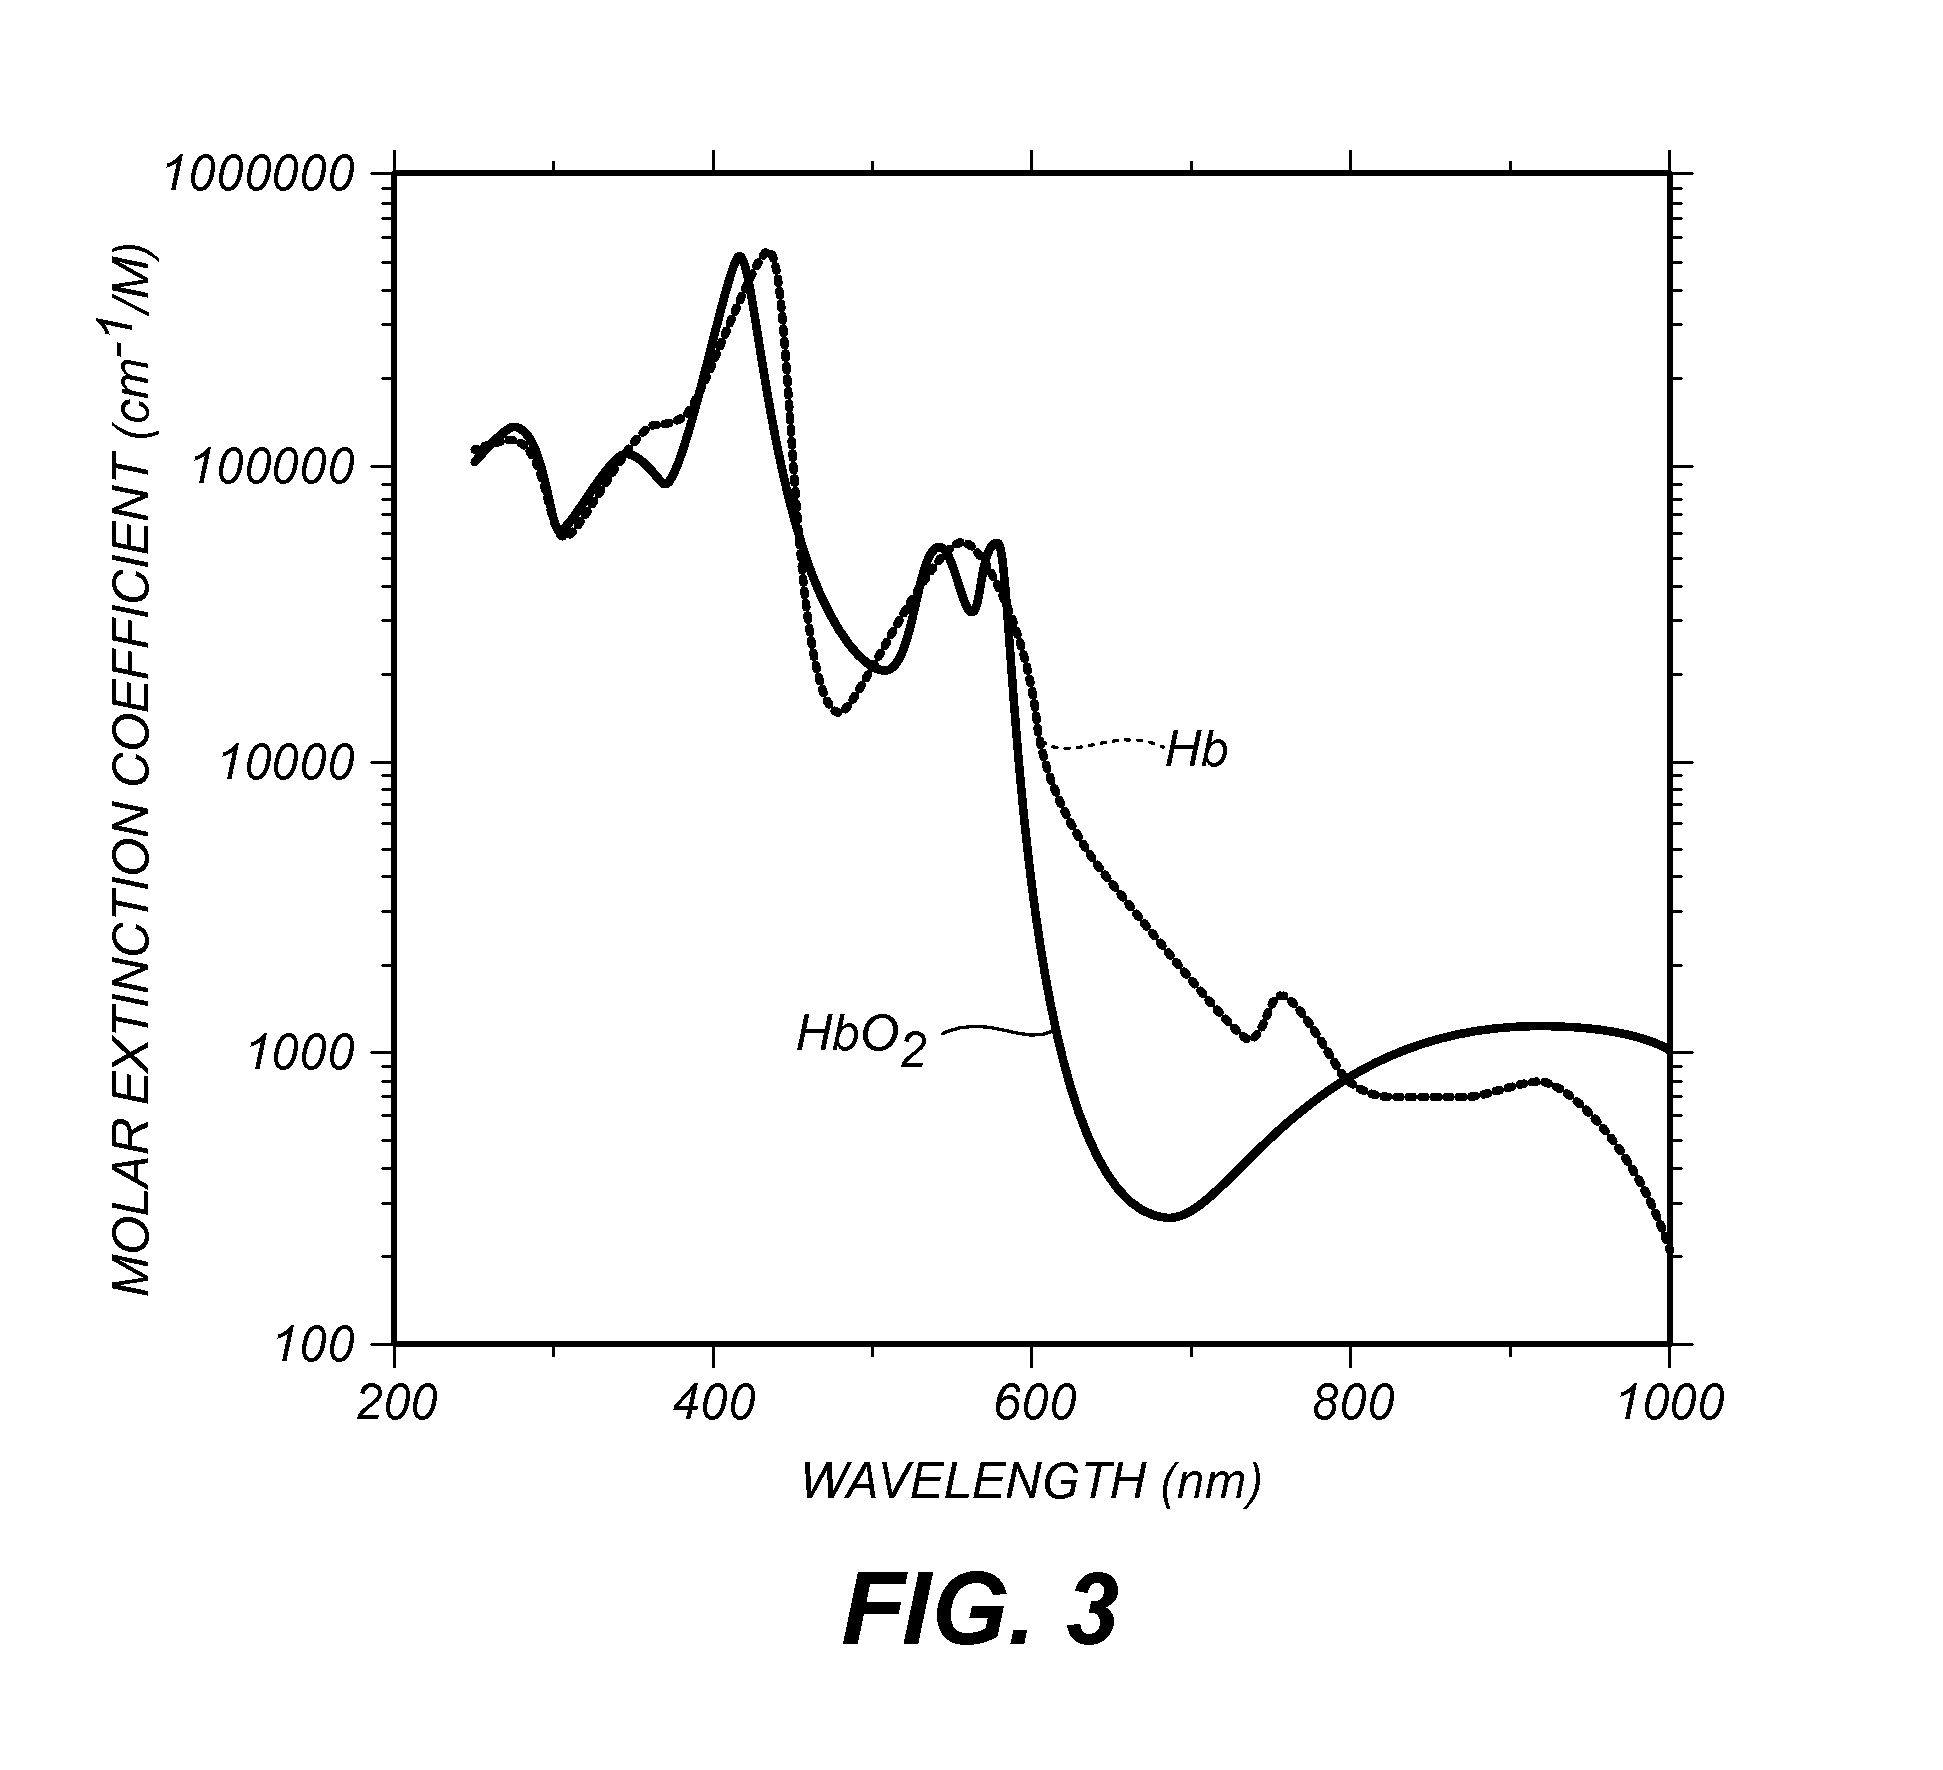 Periodontal disease detection system and method